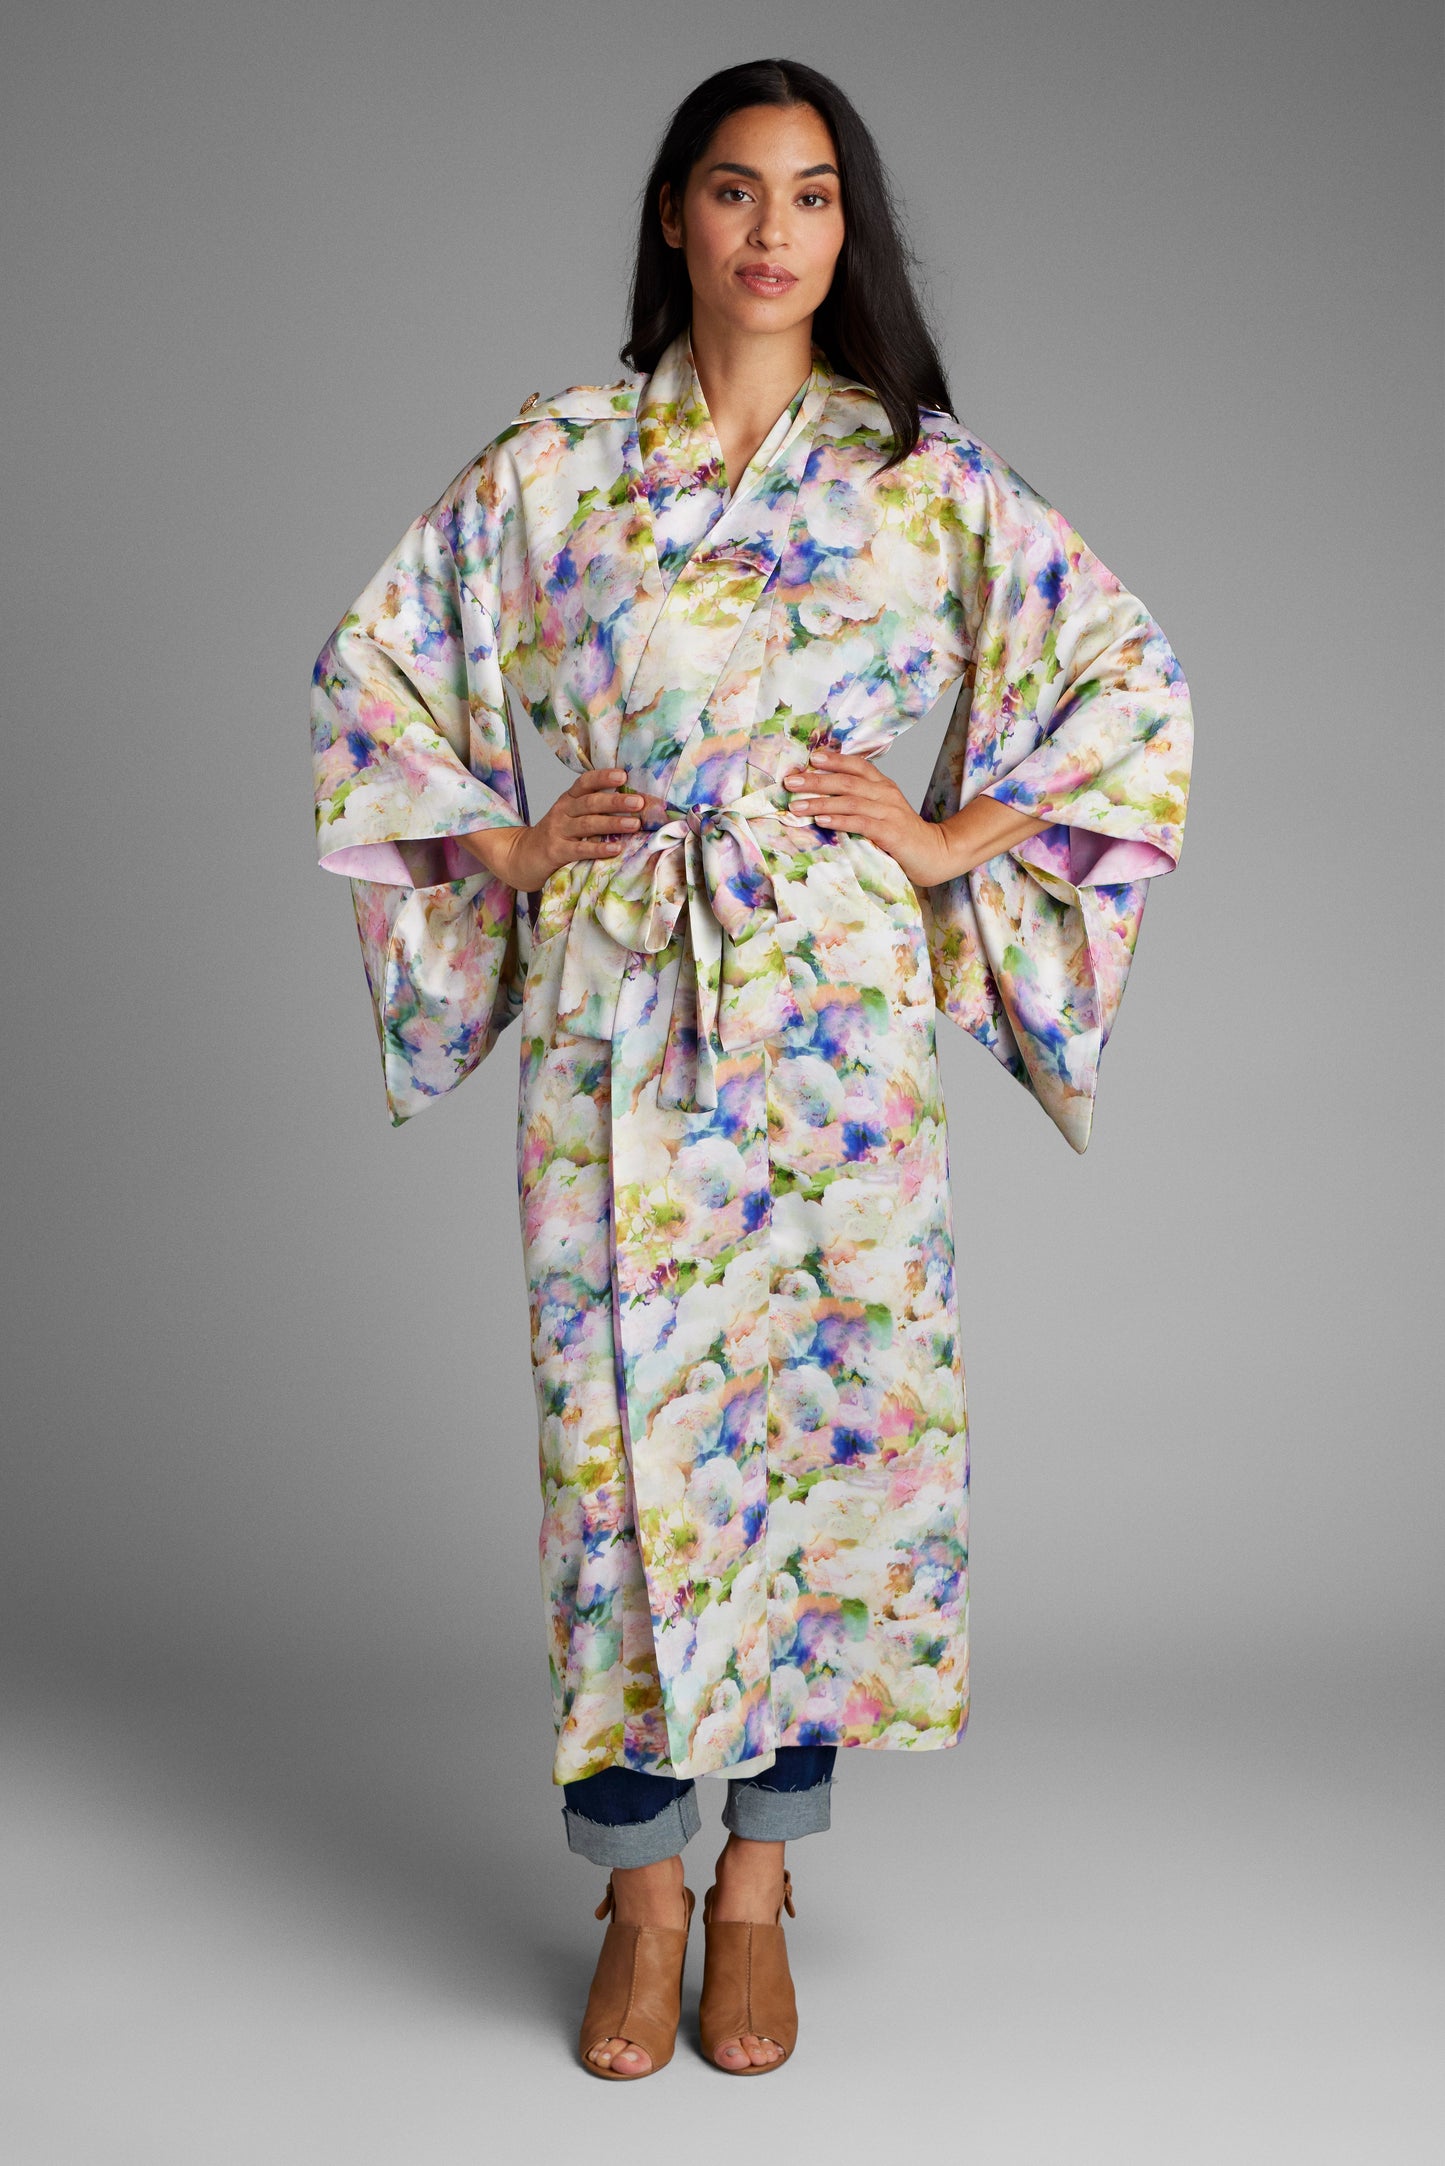 Front profile of woman wearing an all over floral printed kimono duster made from recycled textiles 3